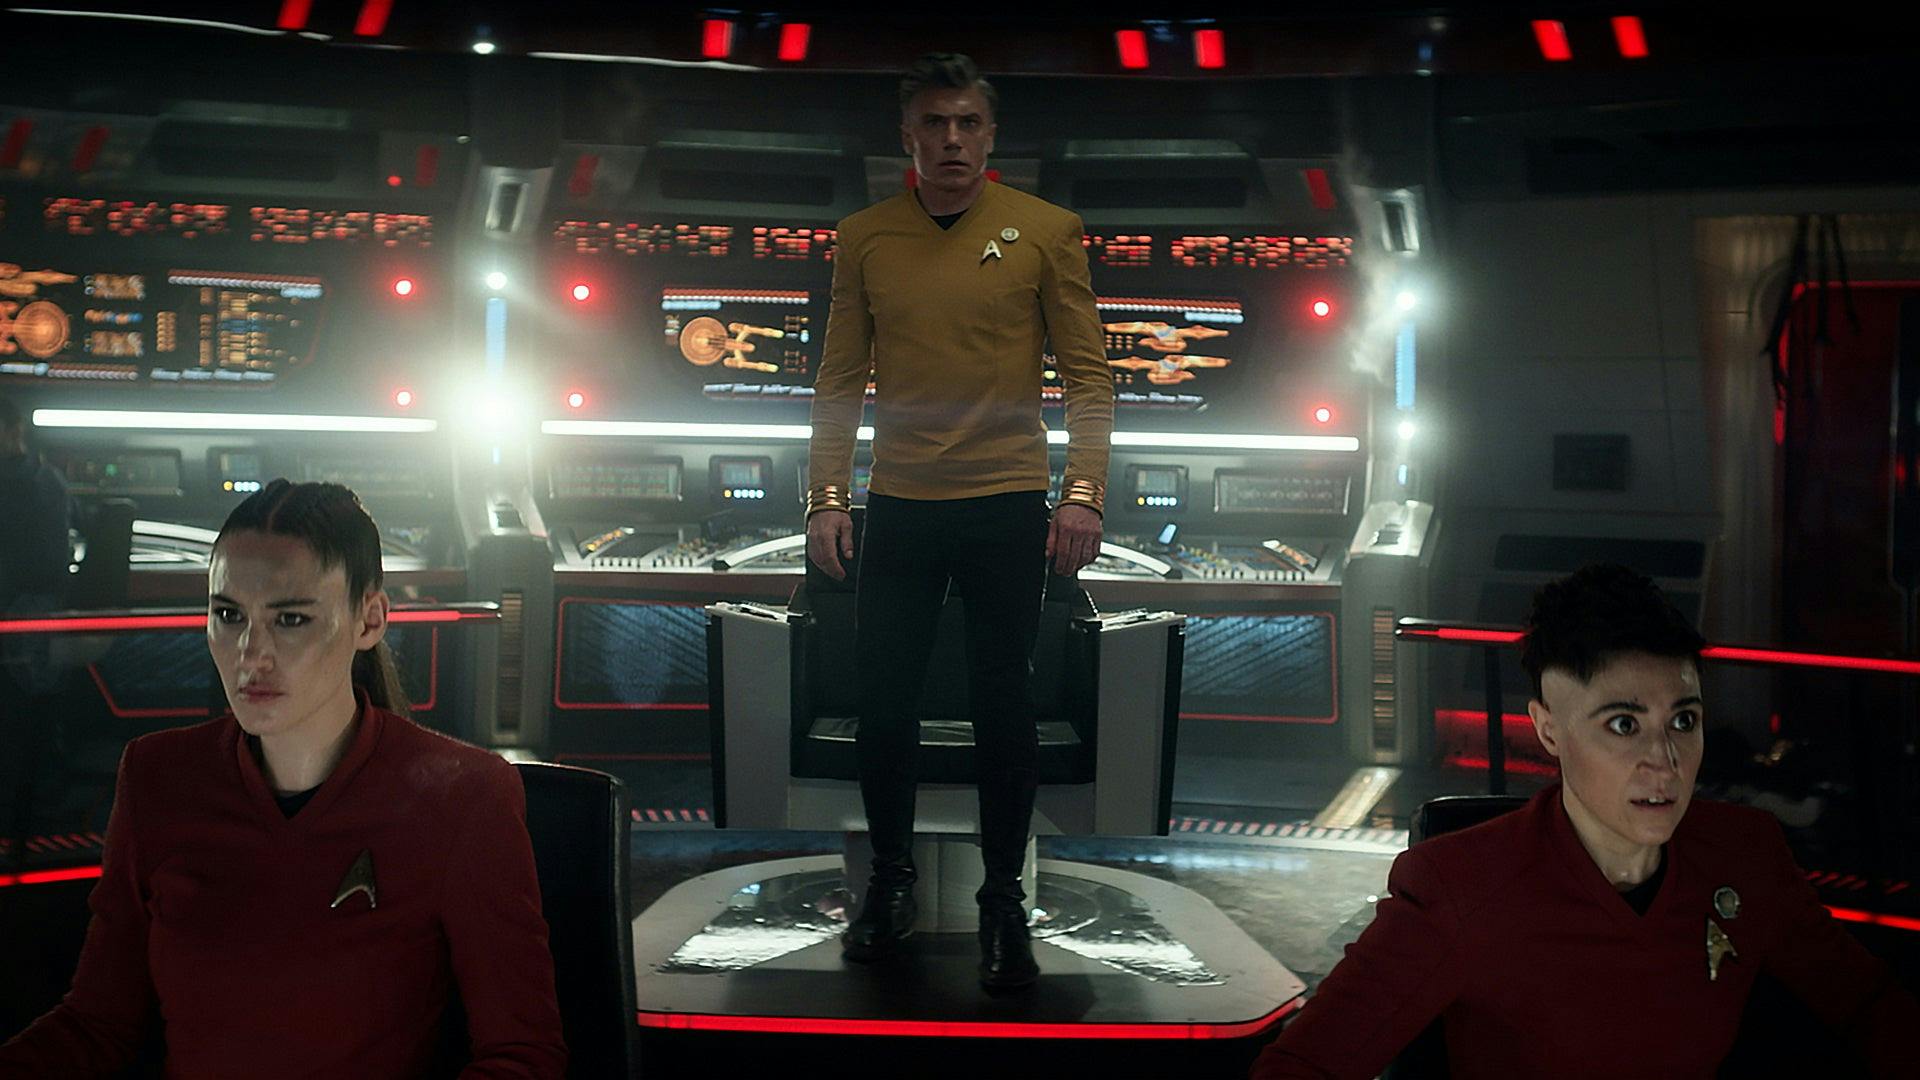 Captain Pike (Strange New Worlds) stands on the bridge in low light. At the helm, La'an Noonien Singh sits to Pike's right and Erica Ortegas sits to Pike's left.